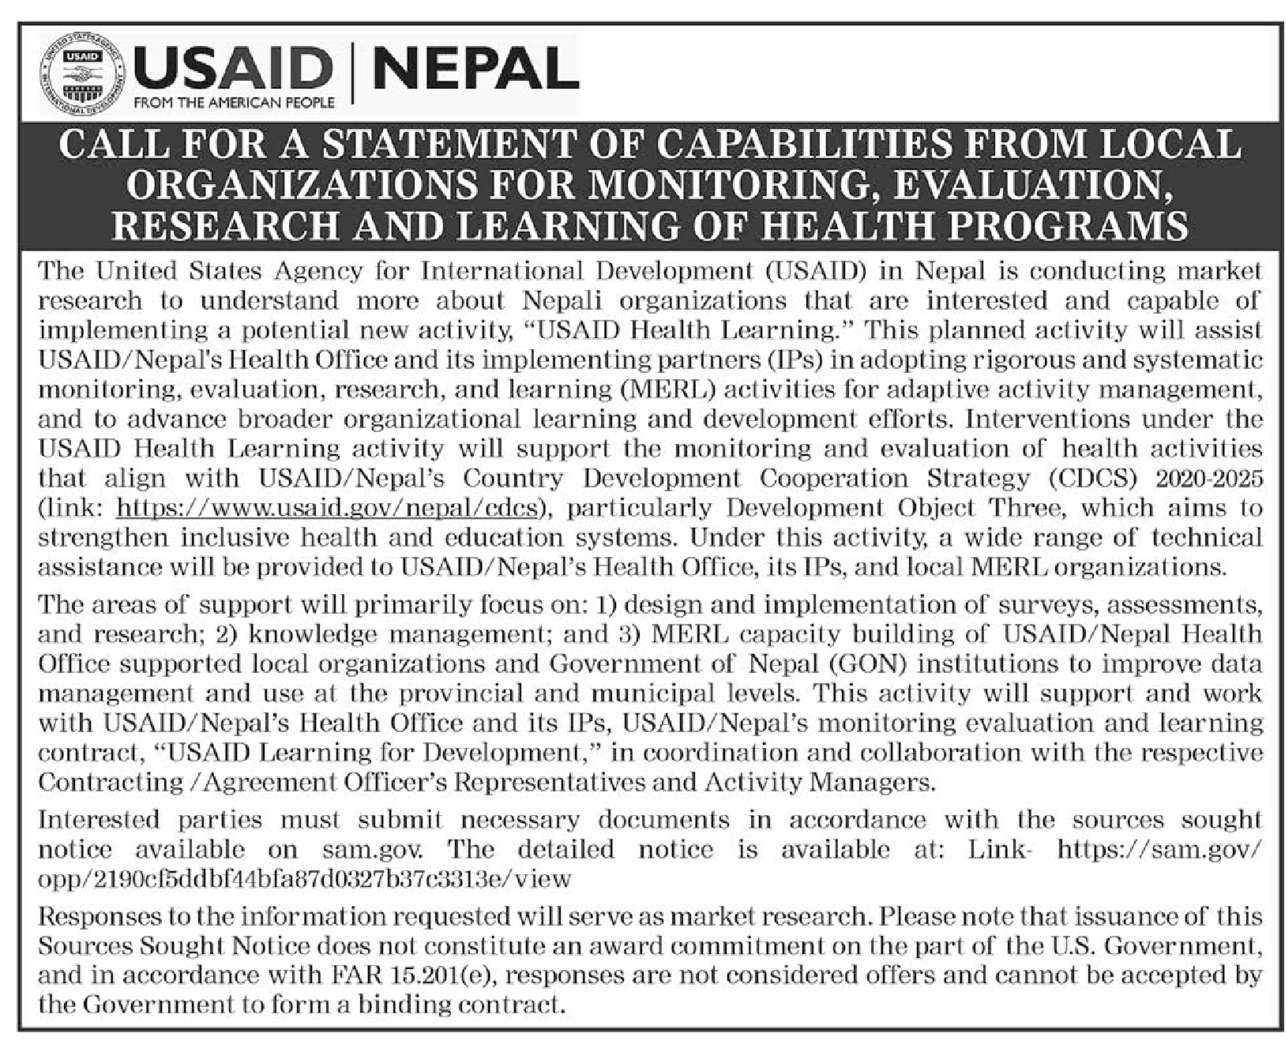 CALL FOR A STATEMENT OF CAPABILITIES FROM LOCAL ORGANIZATIONS FOR MONITORING, EVALUATION, RESEARCH AND LEARNING OF HEALTH PROGRAMS